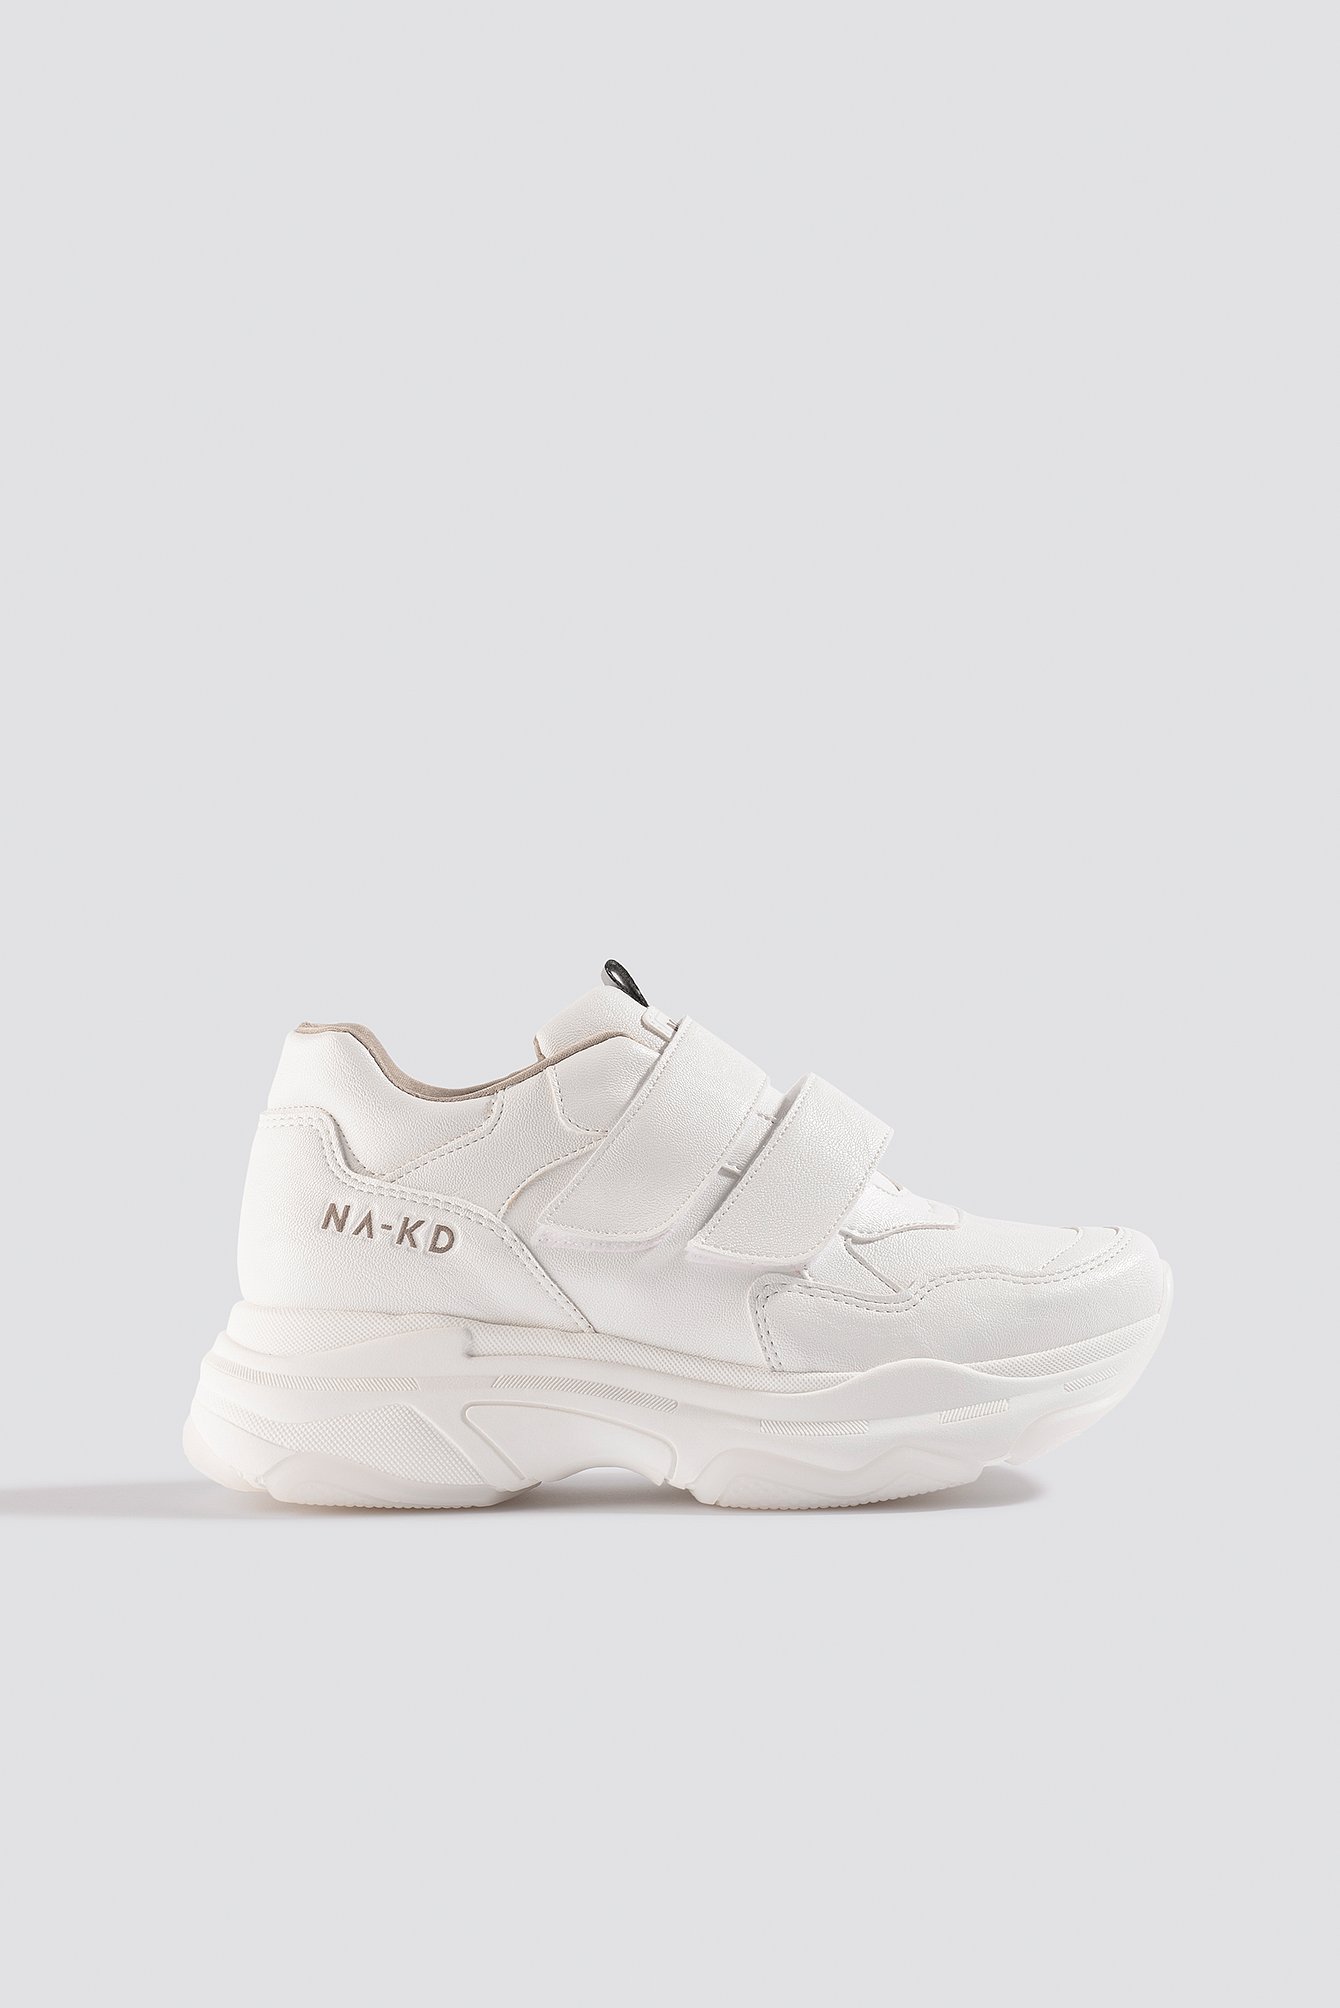 NA-KD Shoes Chunky Sneakers Velcro - White